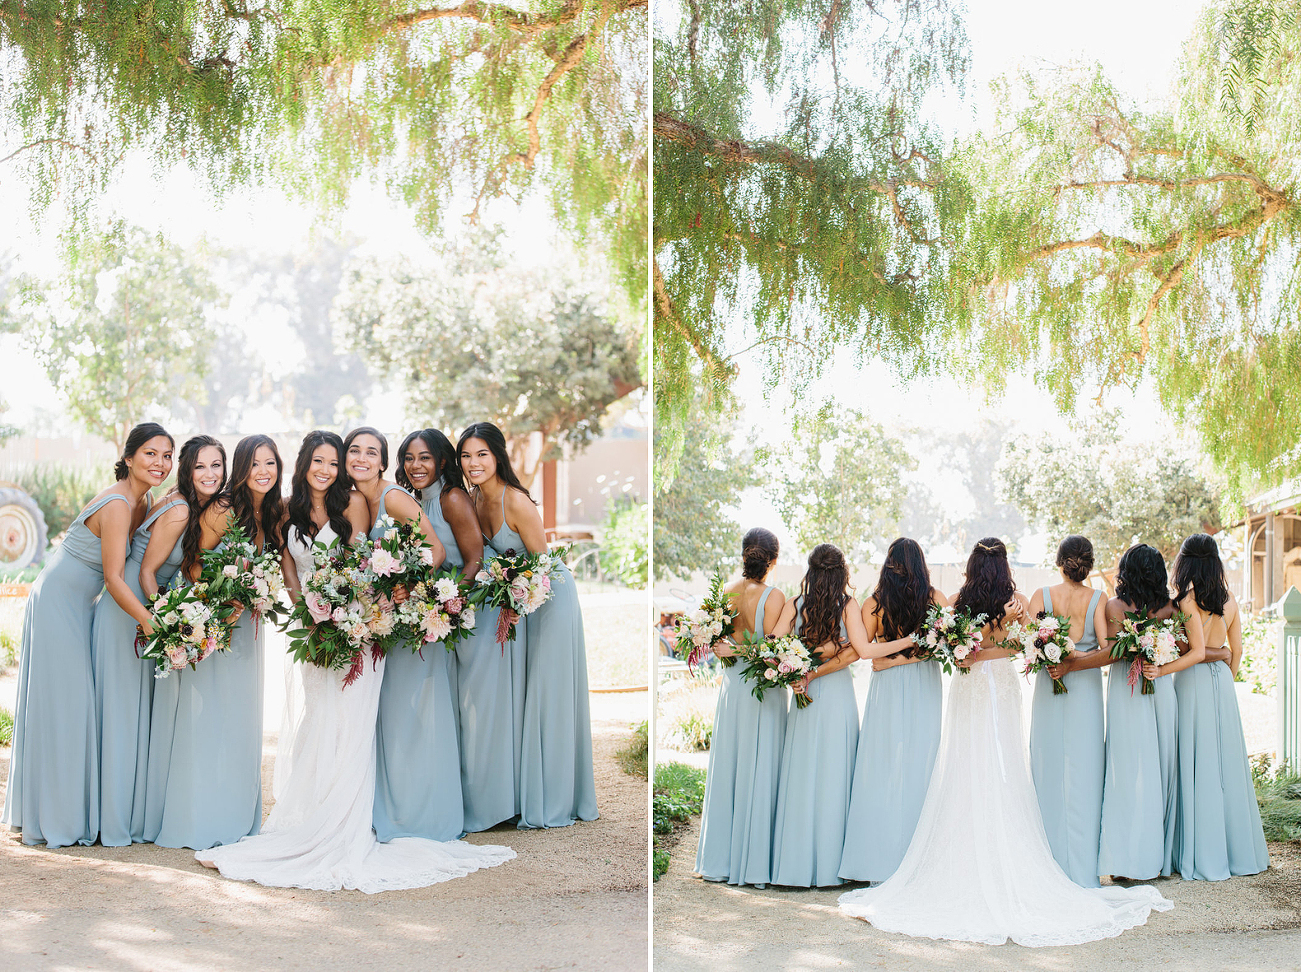 Bridesmaids with the bride in beautiful blue teal dresses - two photos